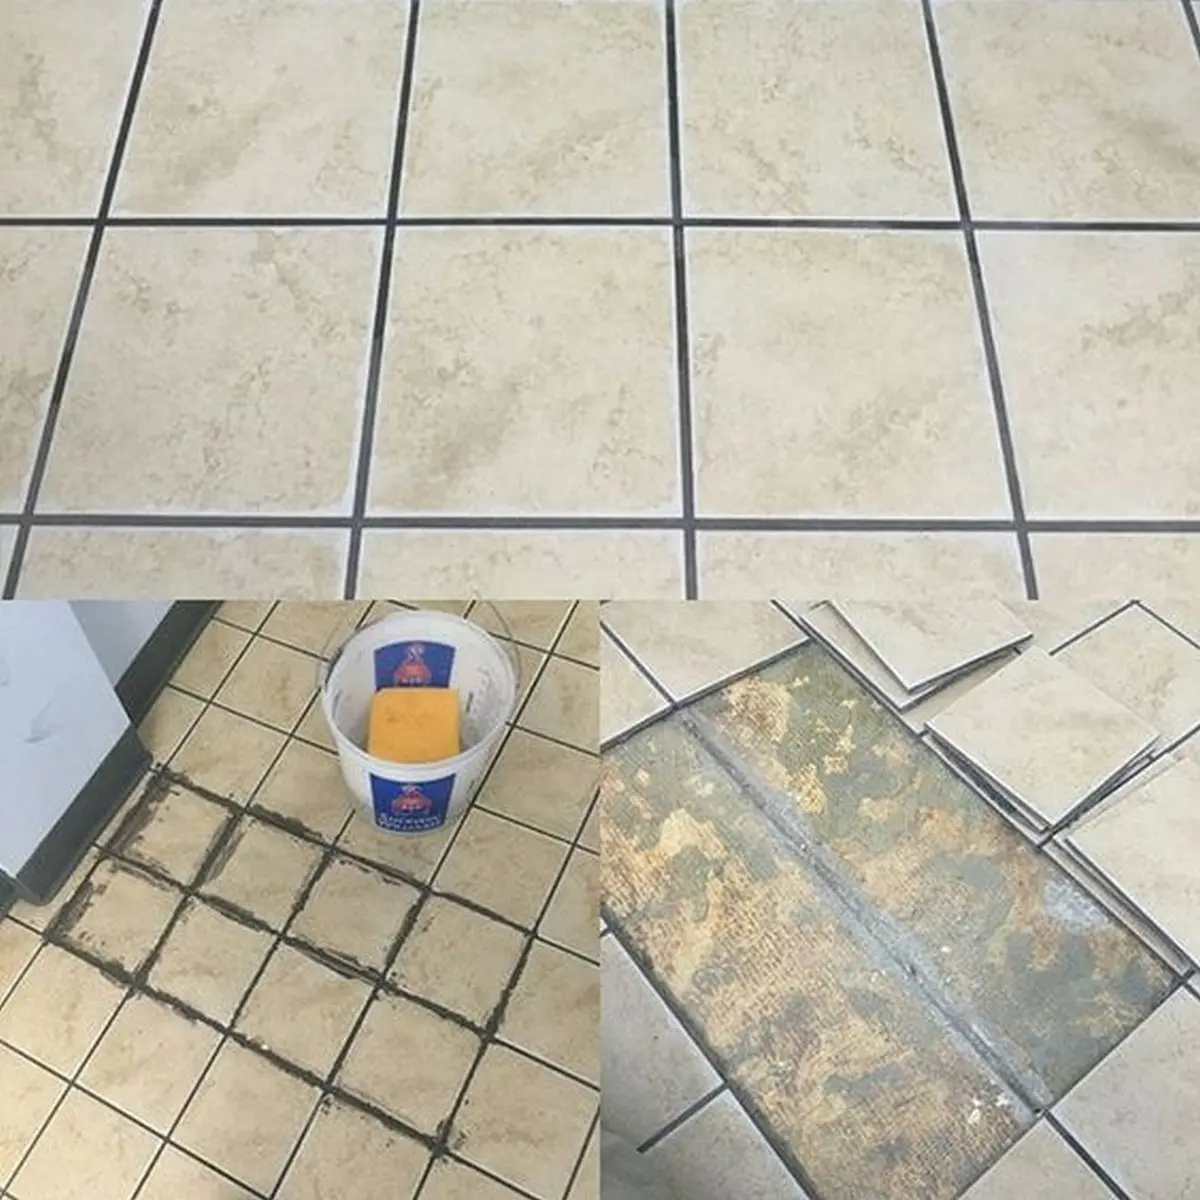 Before and after photos showcasing a tile repair project performed by Mr. Handyman.